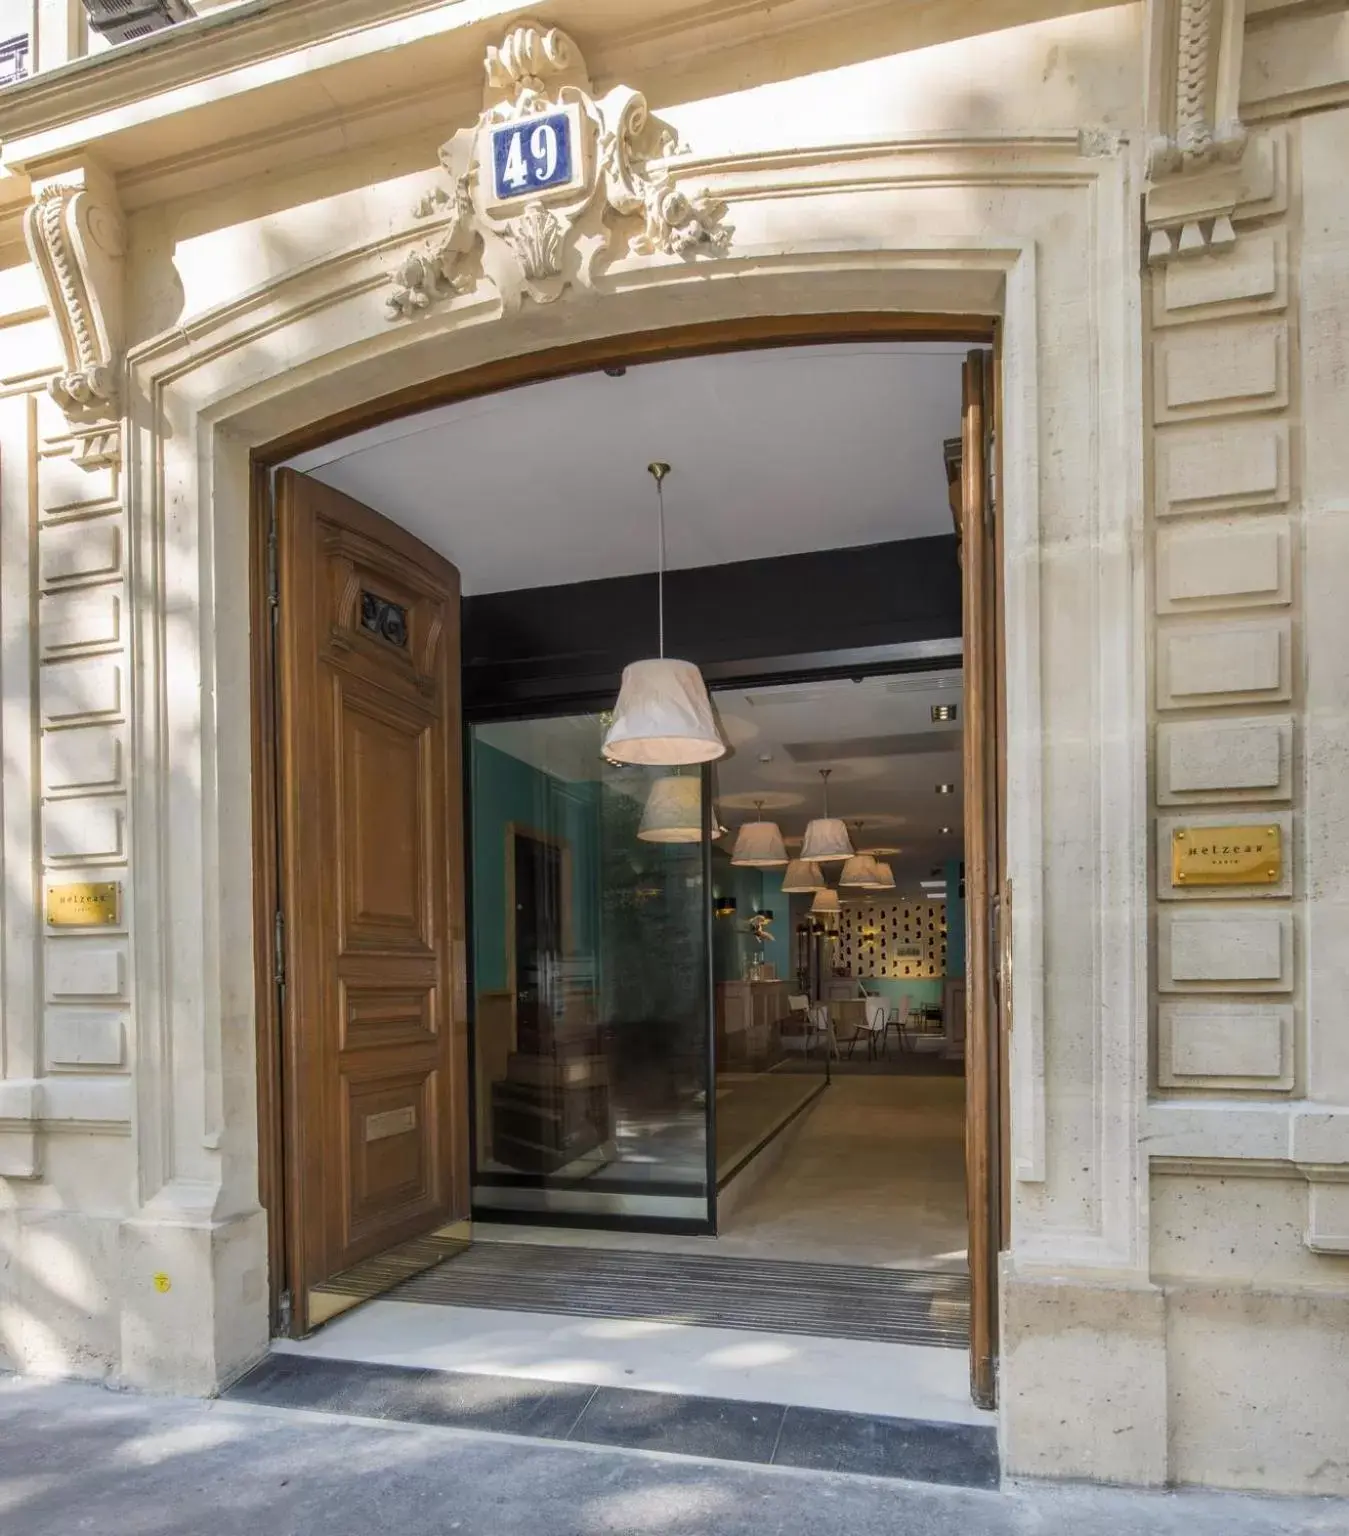 Facade/entrance in Suites & Hotel Helzear Champs-Elysees